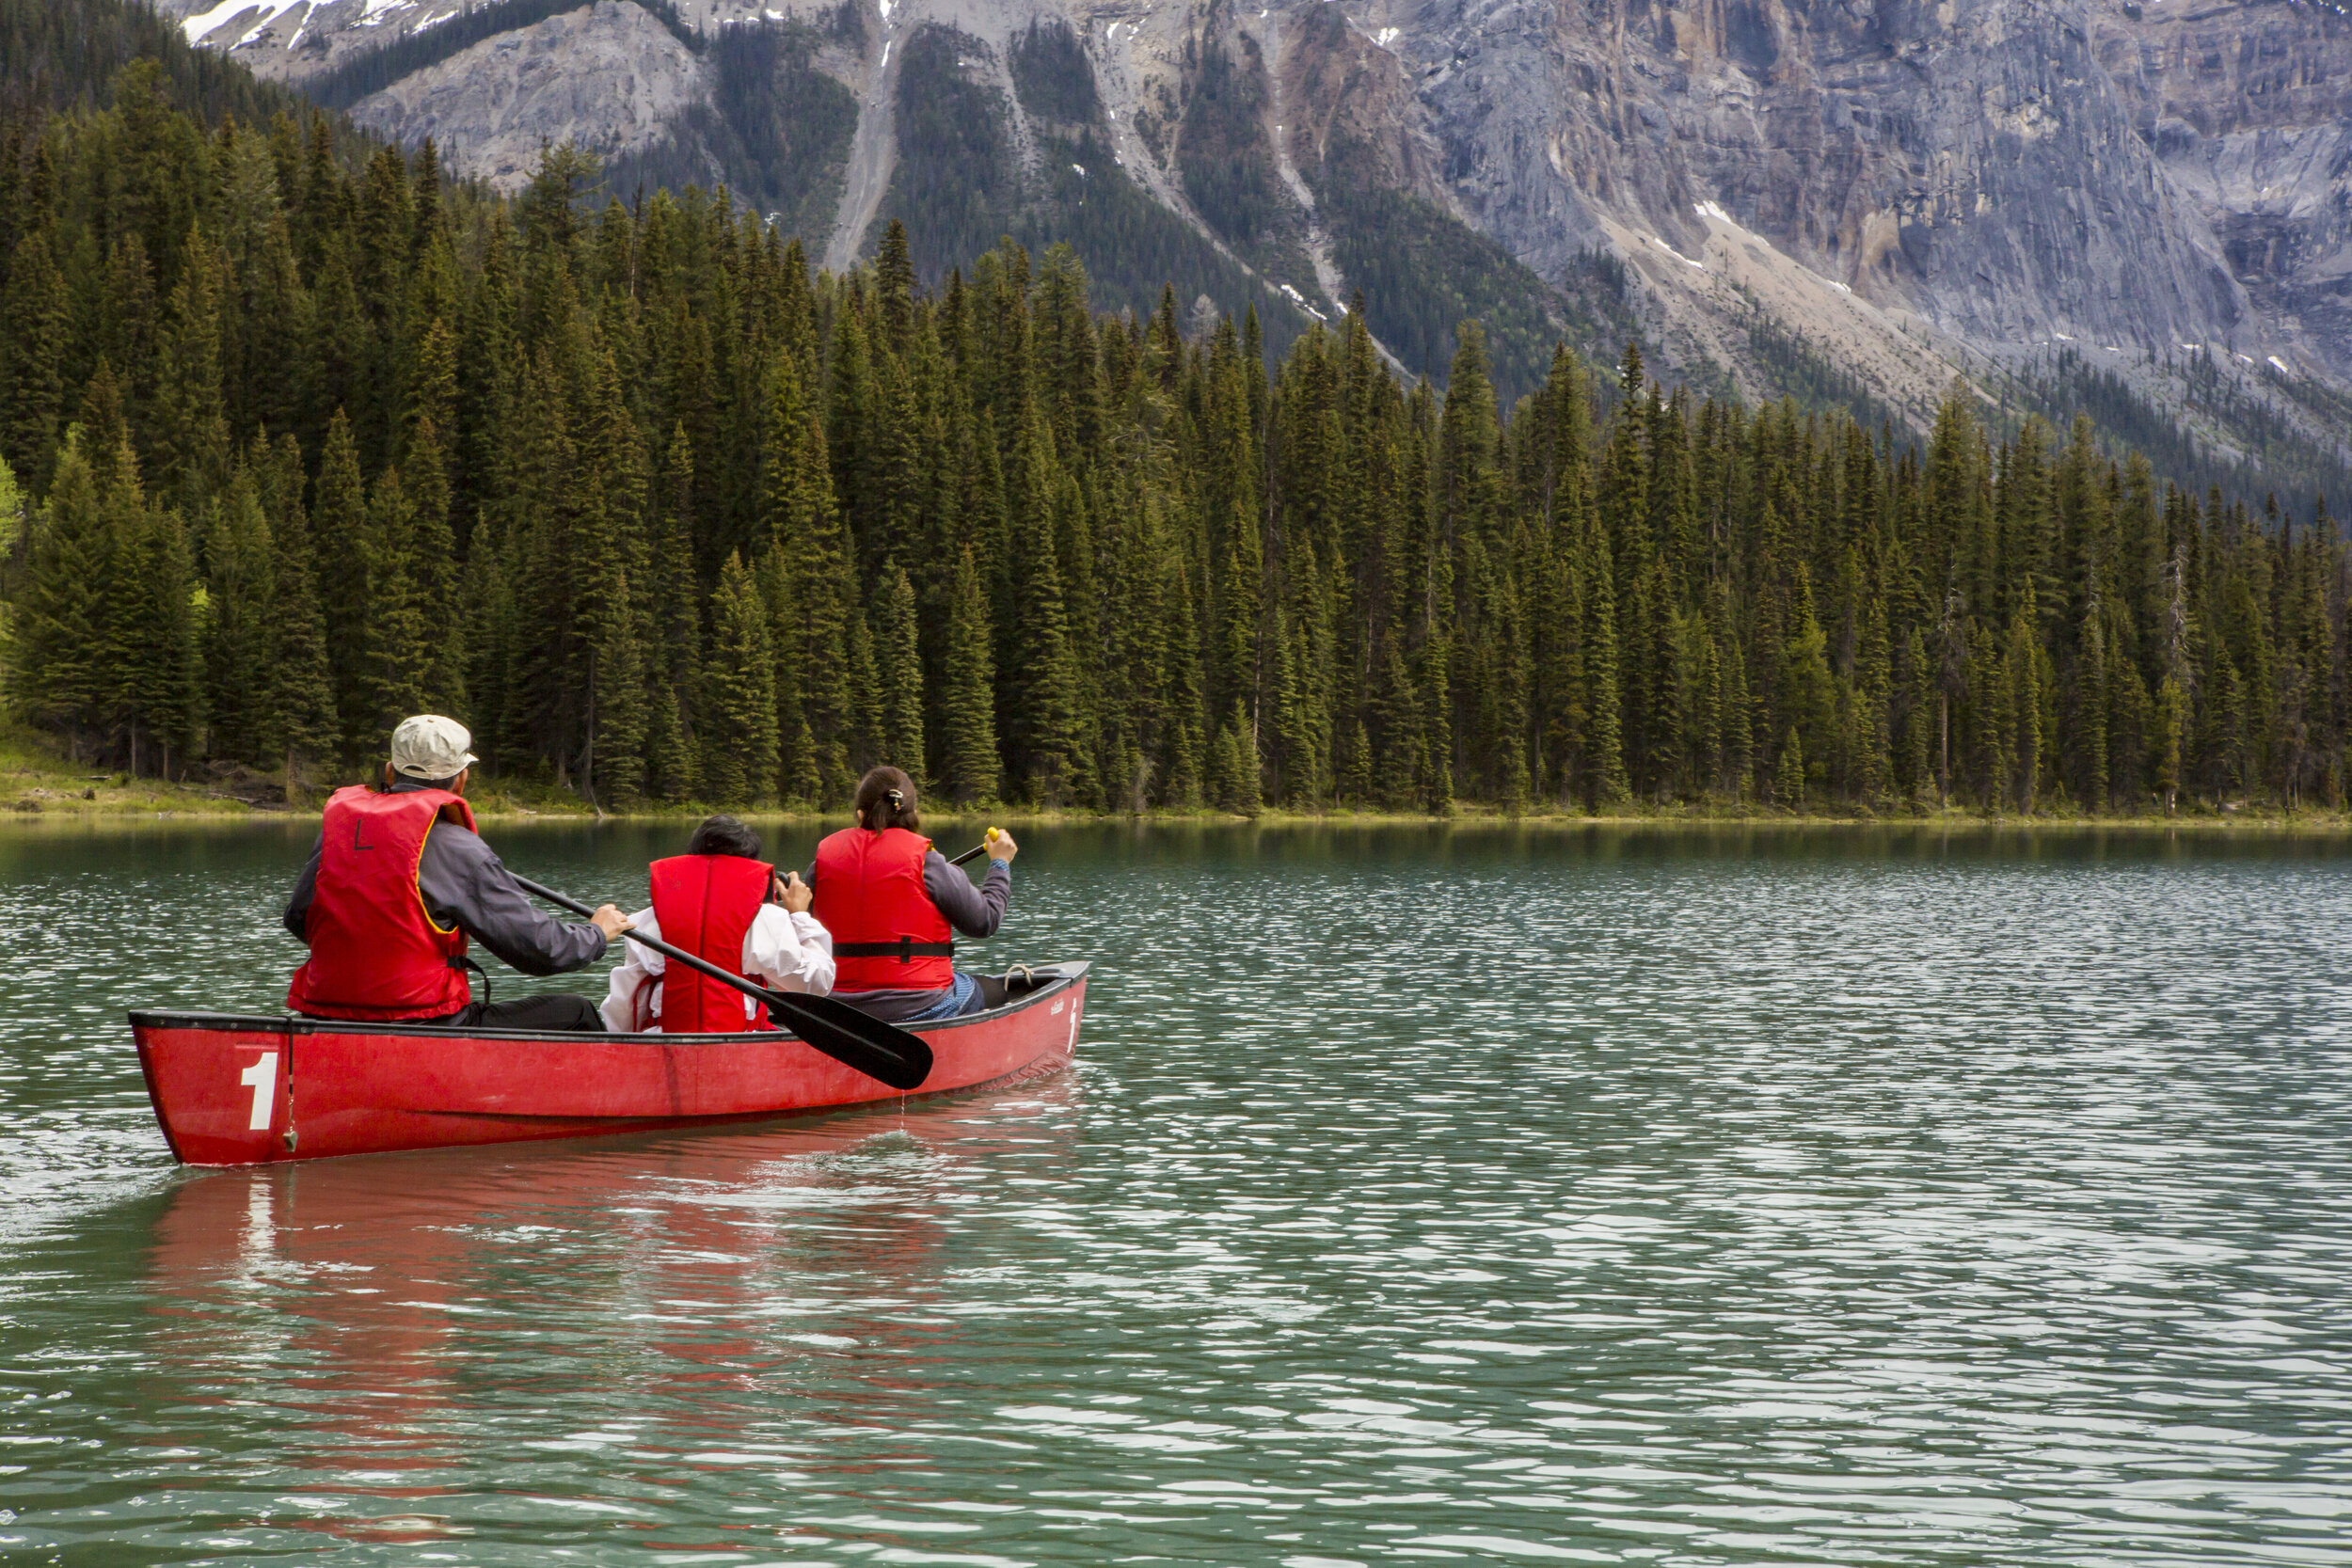 Canoeing in Canadian Rockies at Yoho National Park 